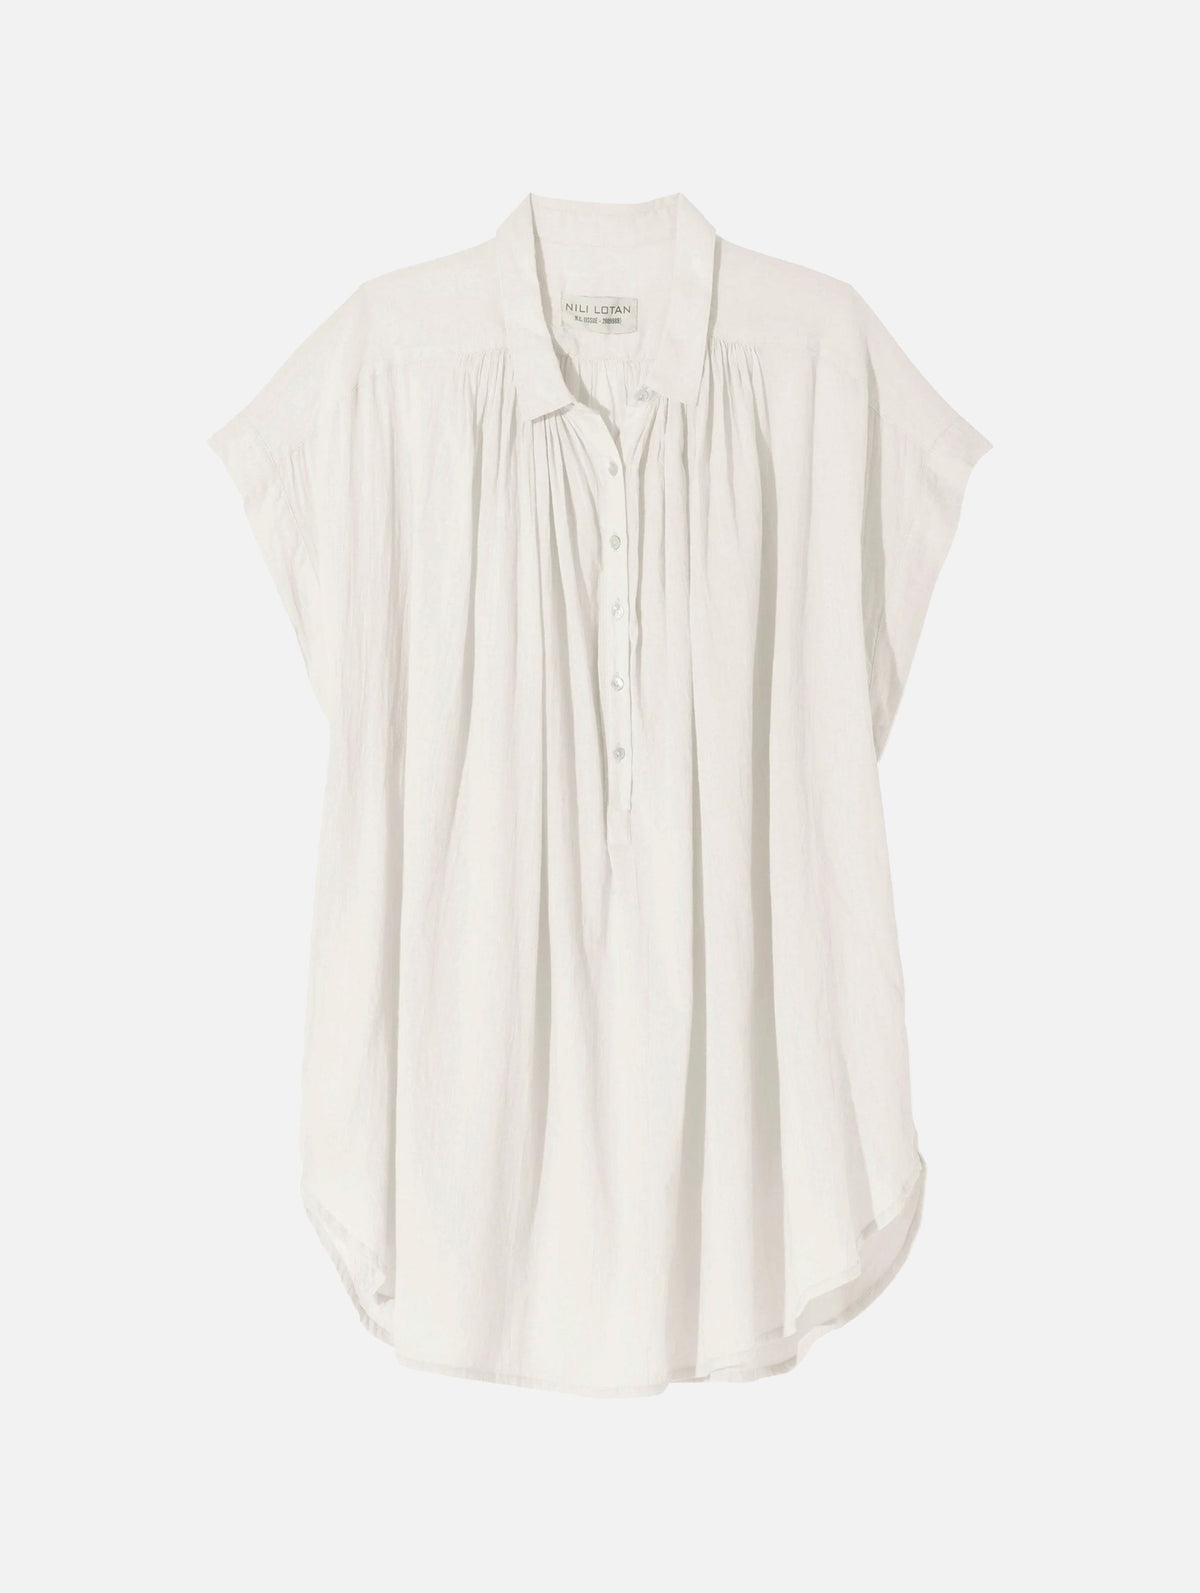 Normandy Cotton Blouse in Ivory